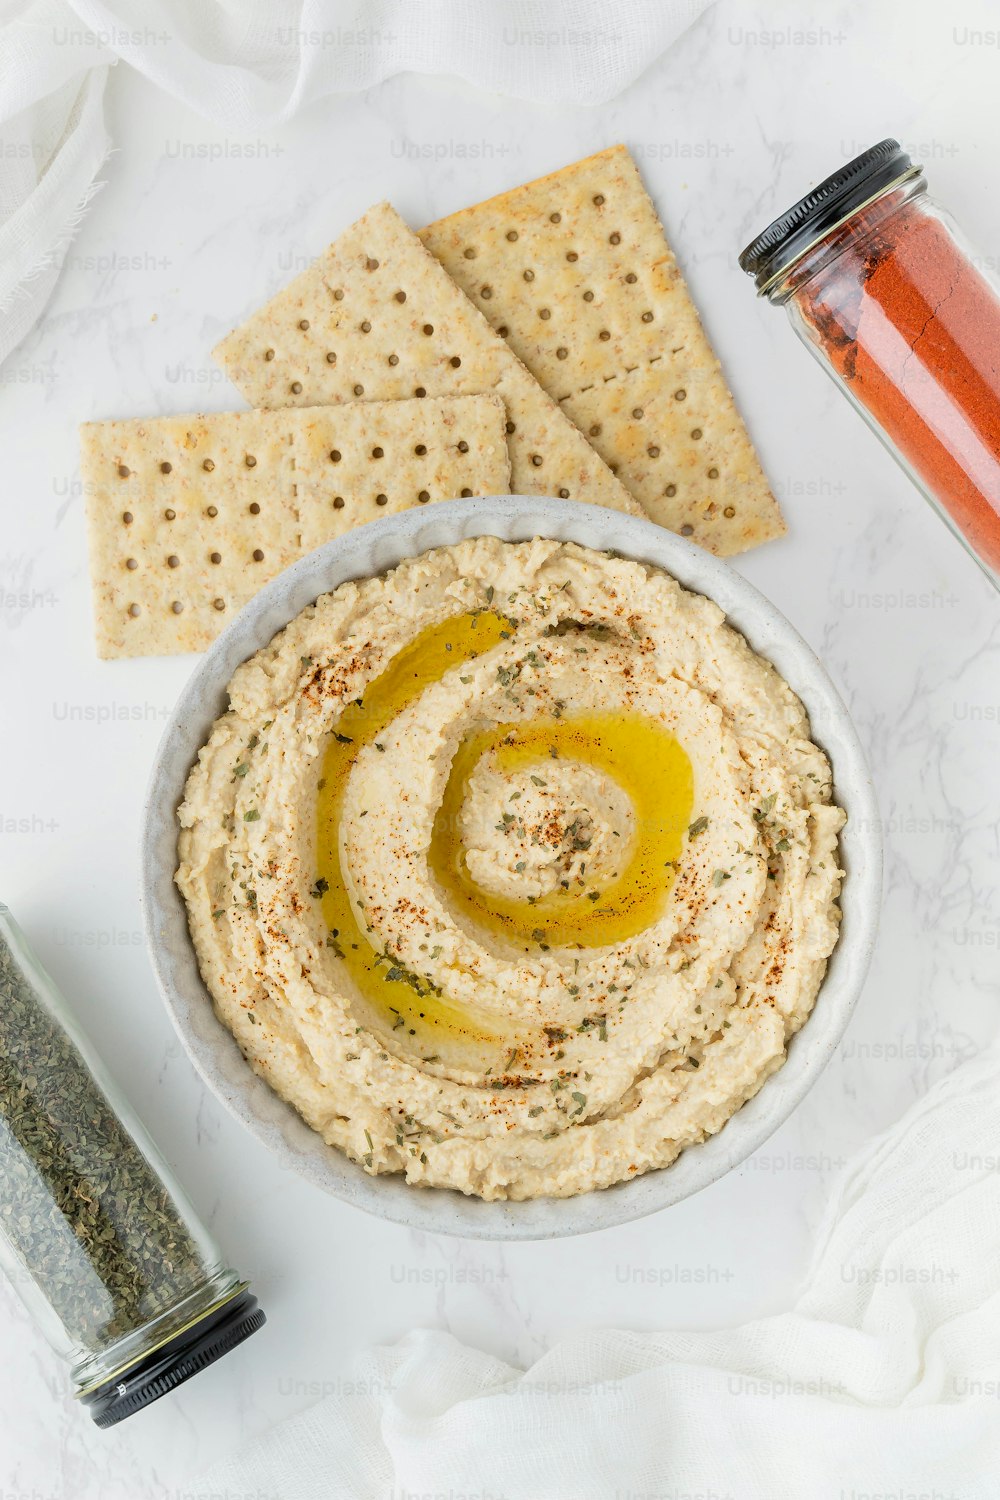 a bowl of hummus next to crackers and a jar of mustard